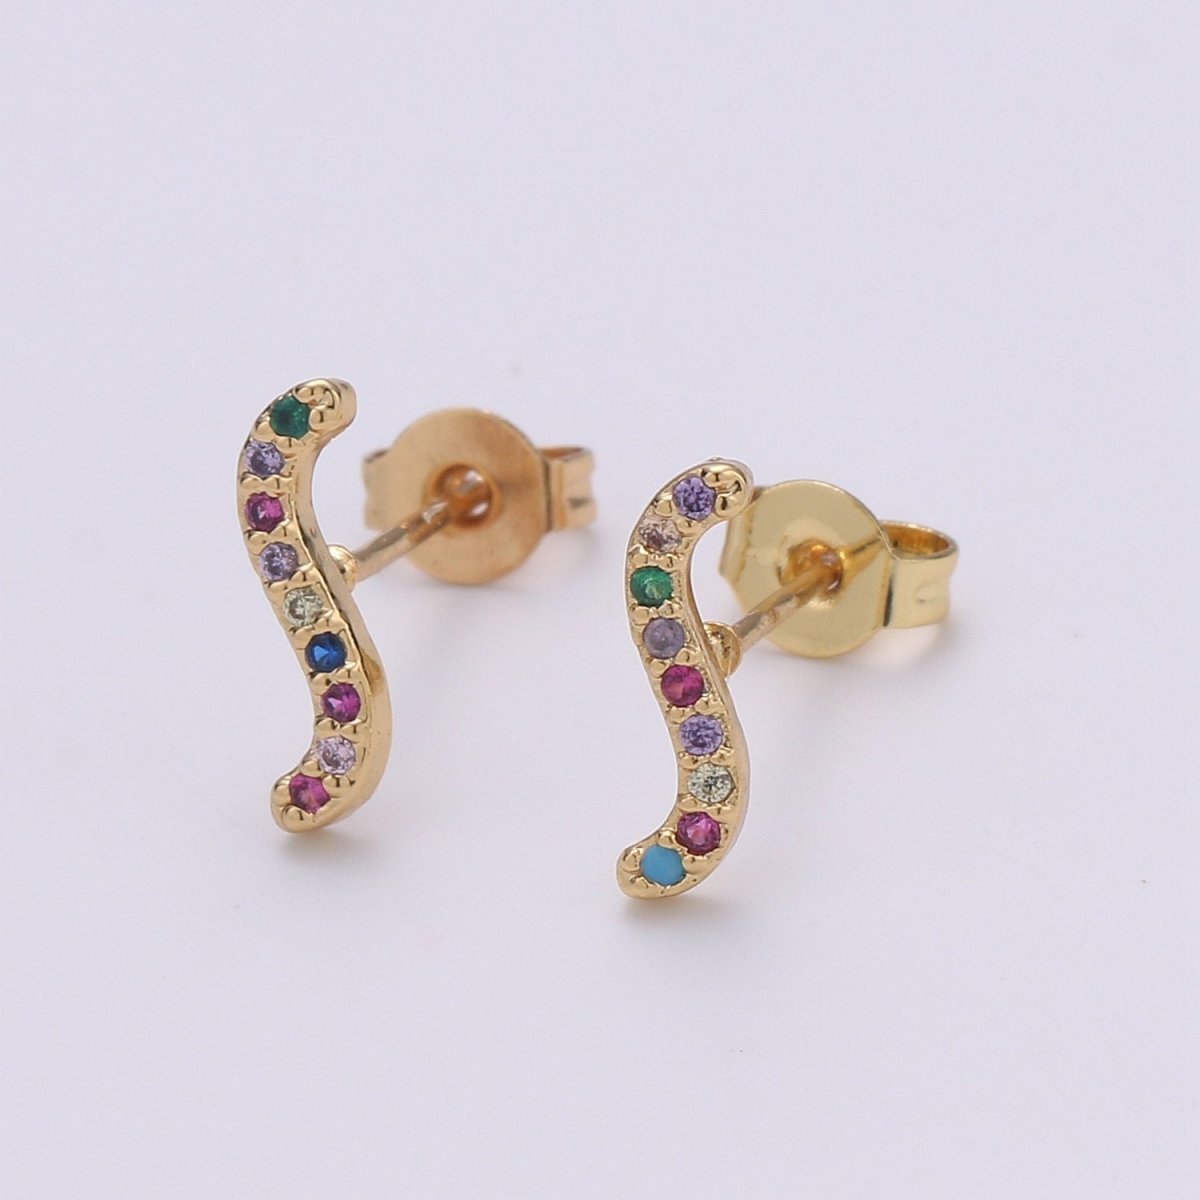 Rainbow Tiny CZ Wave Stud Earrings Dainty Multi Color S Curve Stud Earring Gold Minimalist Jewelry Gift For her christmas gift Q-251 - DLUXCA